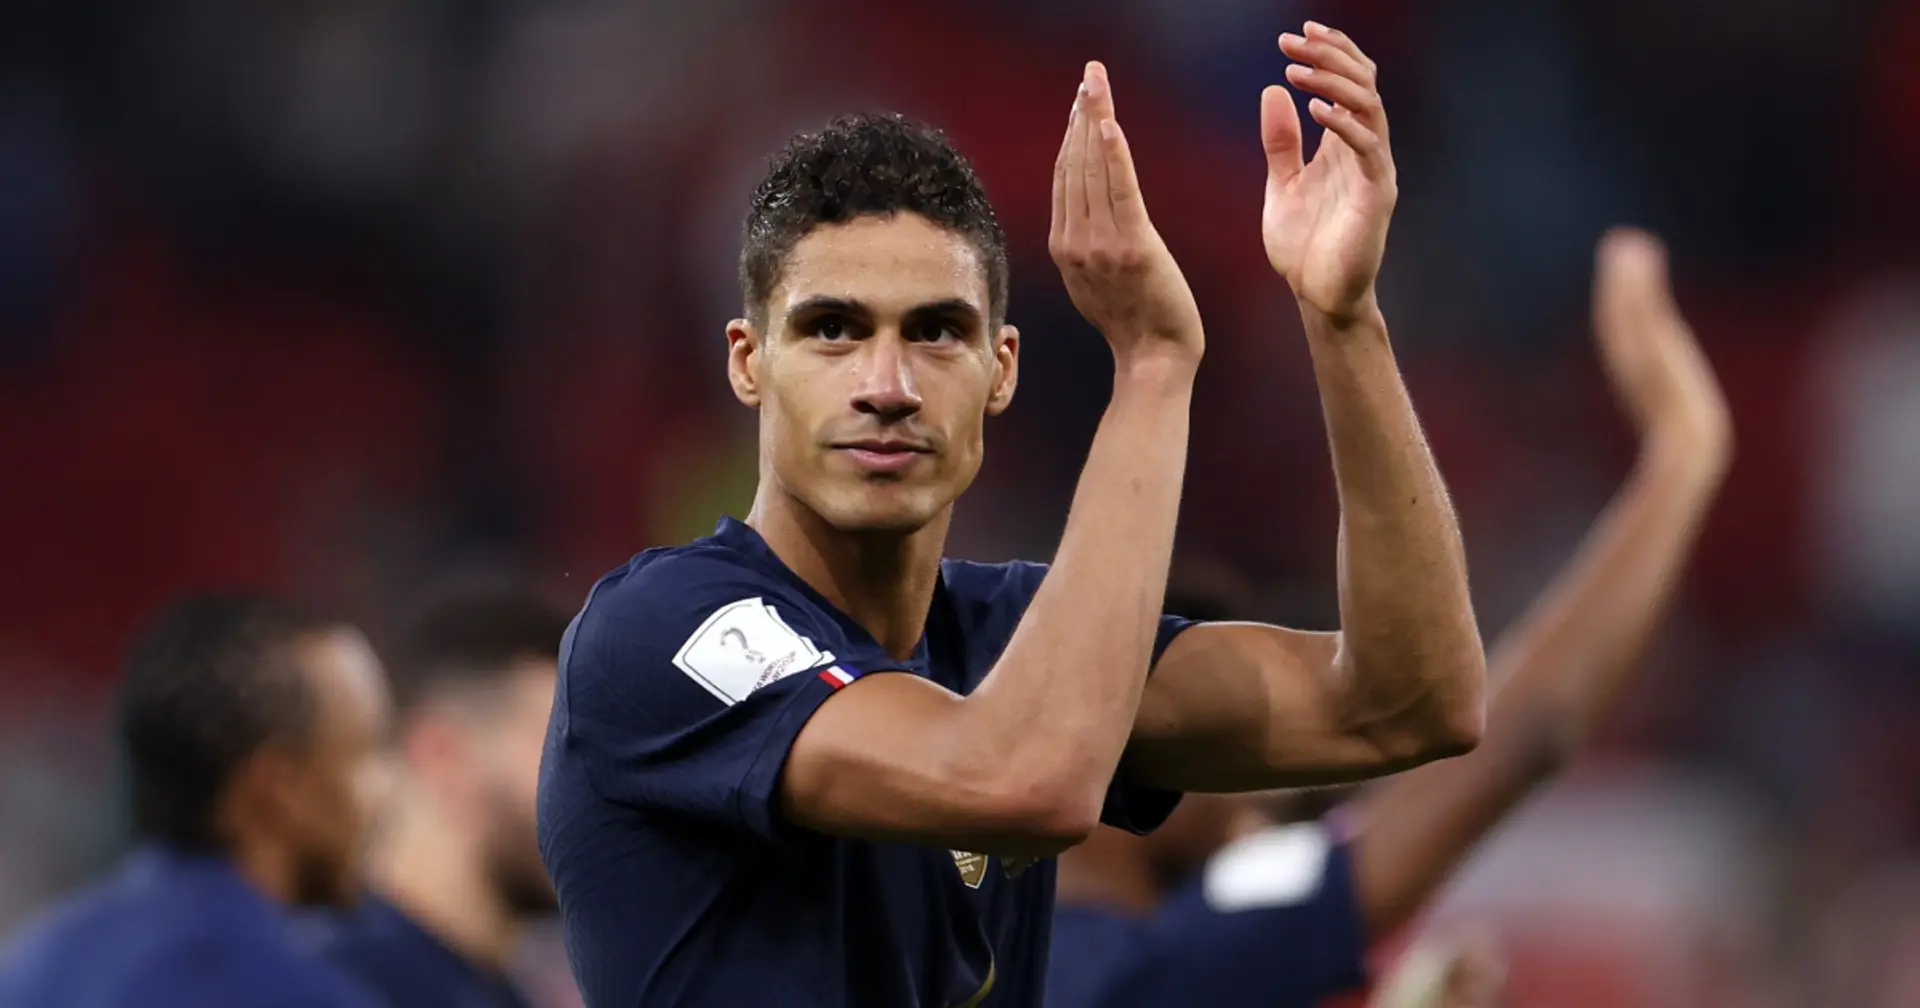 'Rolls-Royce of a defender': Man United fans react to Raphael Varane's World Cup display ahead of England clash